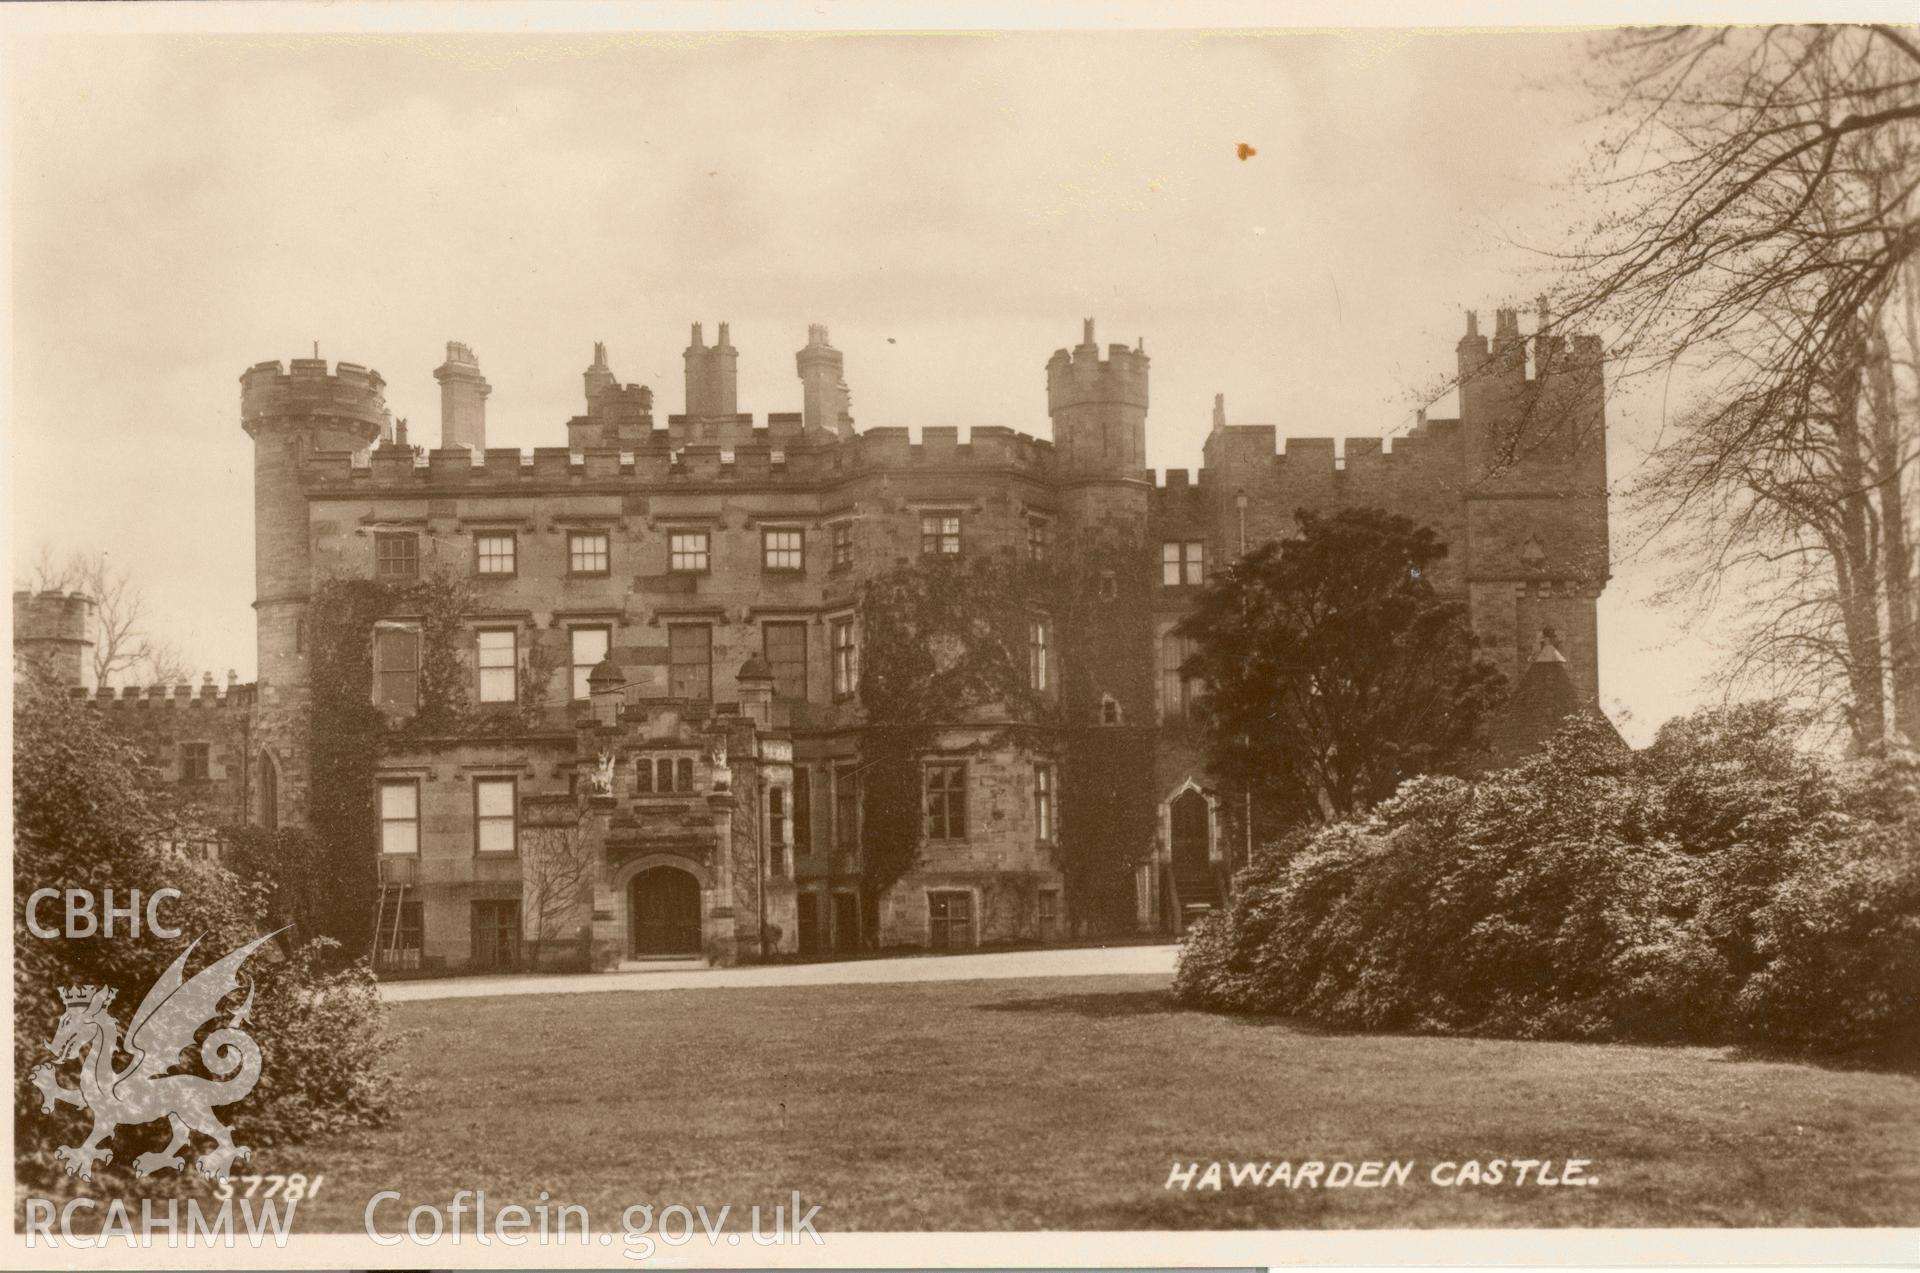 Digitised postcard image of Hawarden Castle, Valentine and Sons Ltd. Produced by Parks and Gardens Data Services, from an original item in the Peter Davis Collection at Parks and Gardens UK. We hold only web-resolution images of this collection, suitable for viewing on screen and for research purposes only. We do not hold the original images, or publication quality scans.